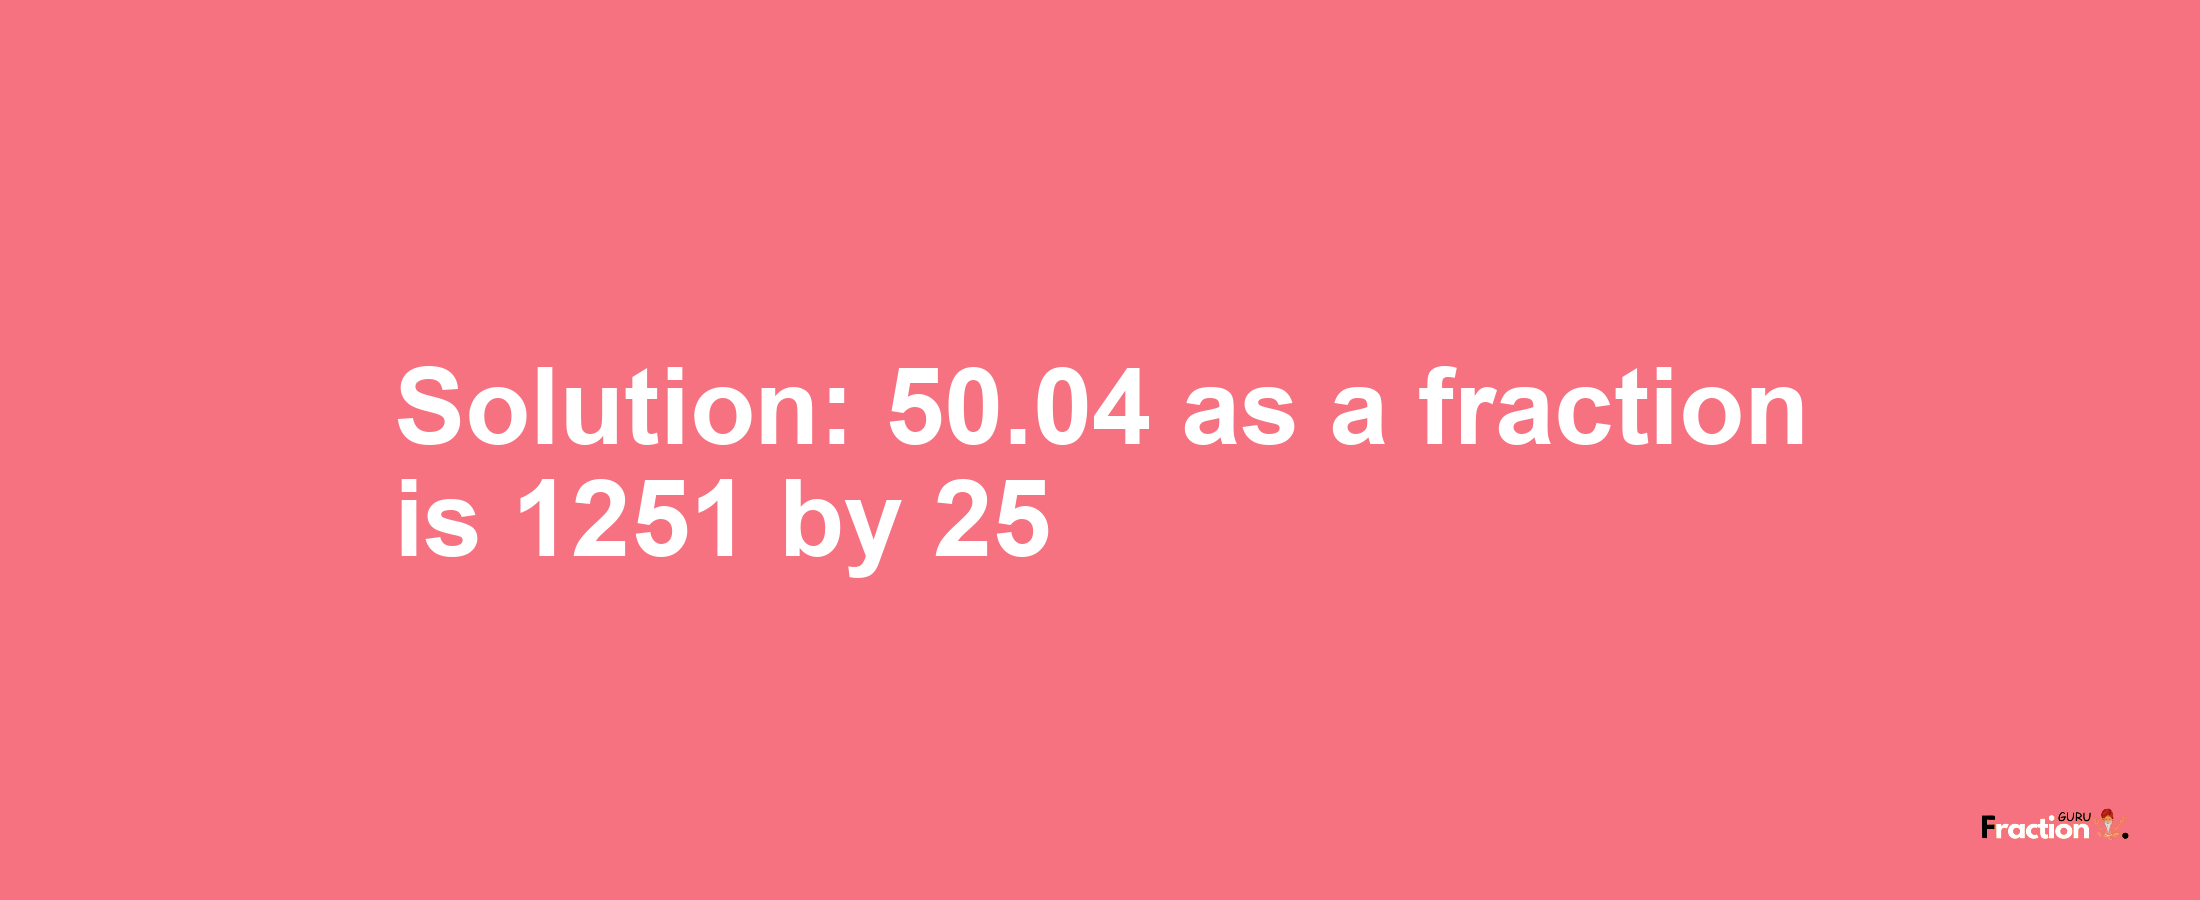 Solution:50.04 as a fraction is 1251/25